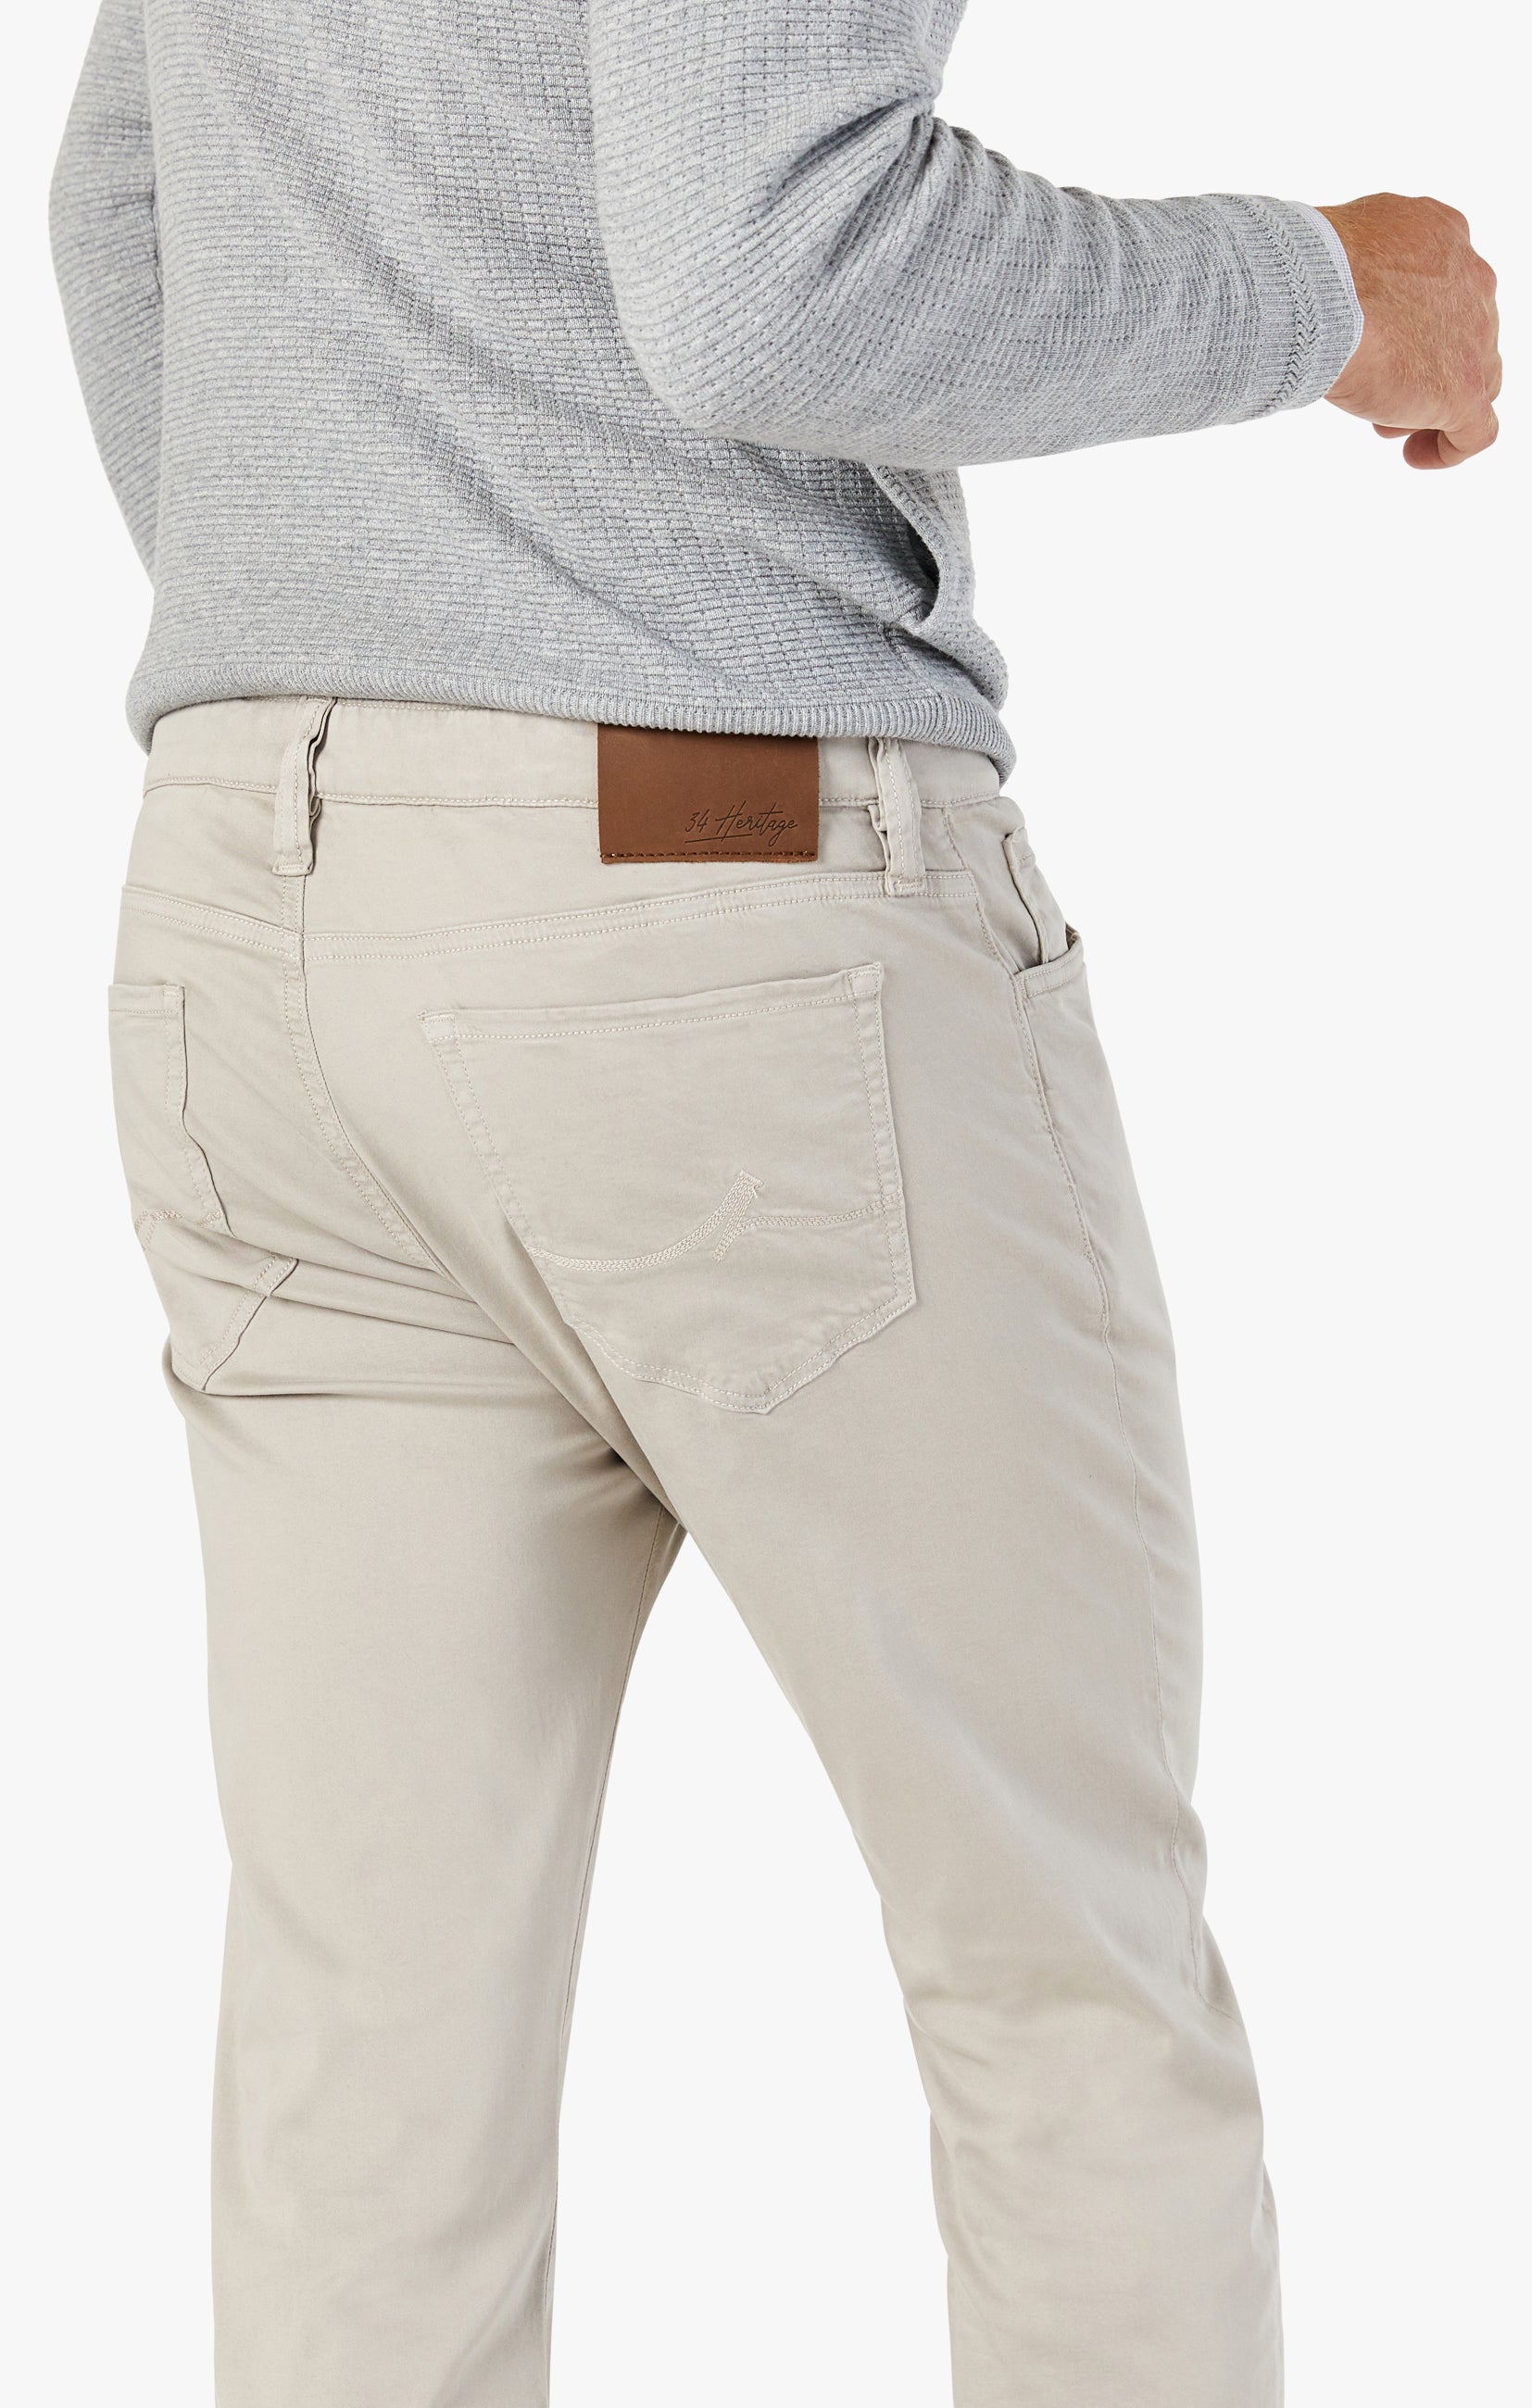 Courage Straight Leg Pants In Dawn Twill Image 5